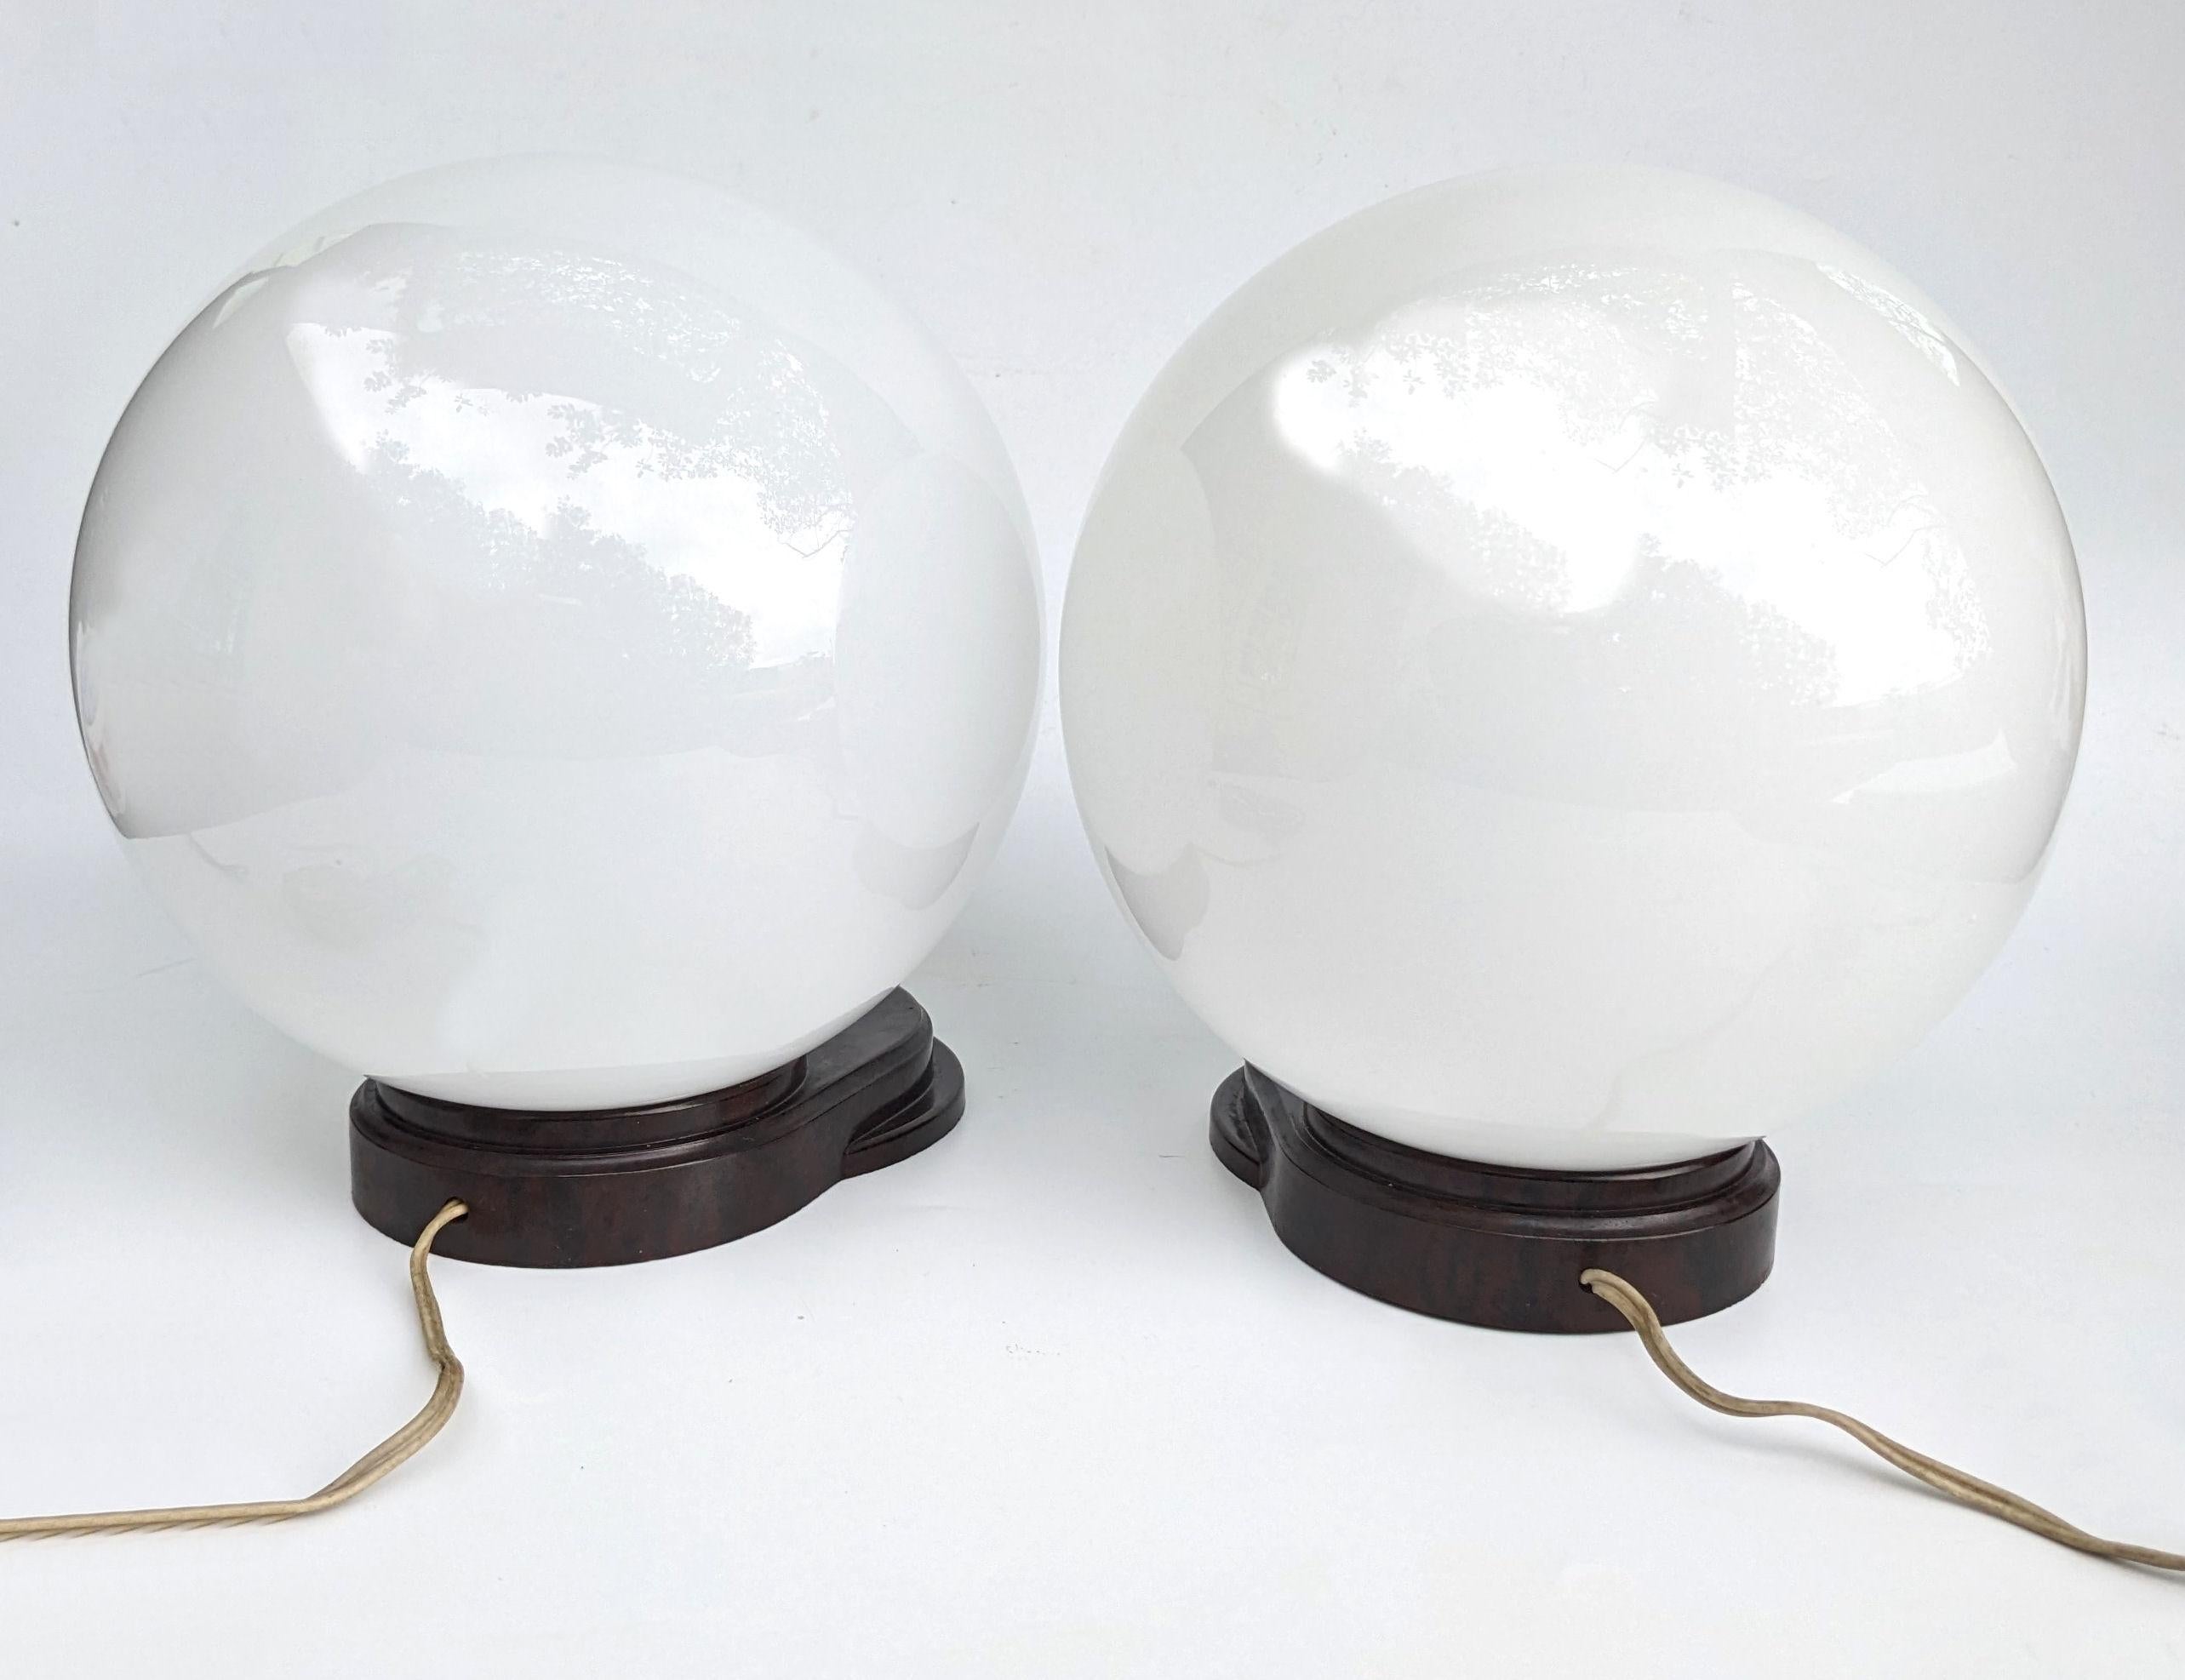 Art Deco Matching Pair of Modernist Bakelite Table Lamps, c1930 For Sale 1